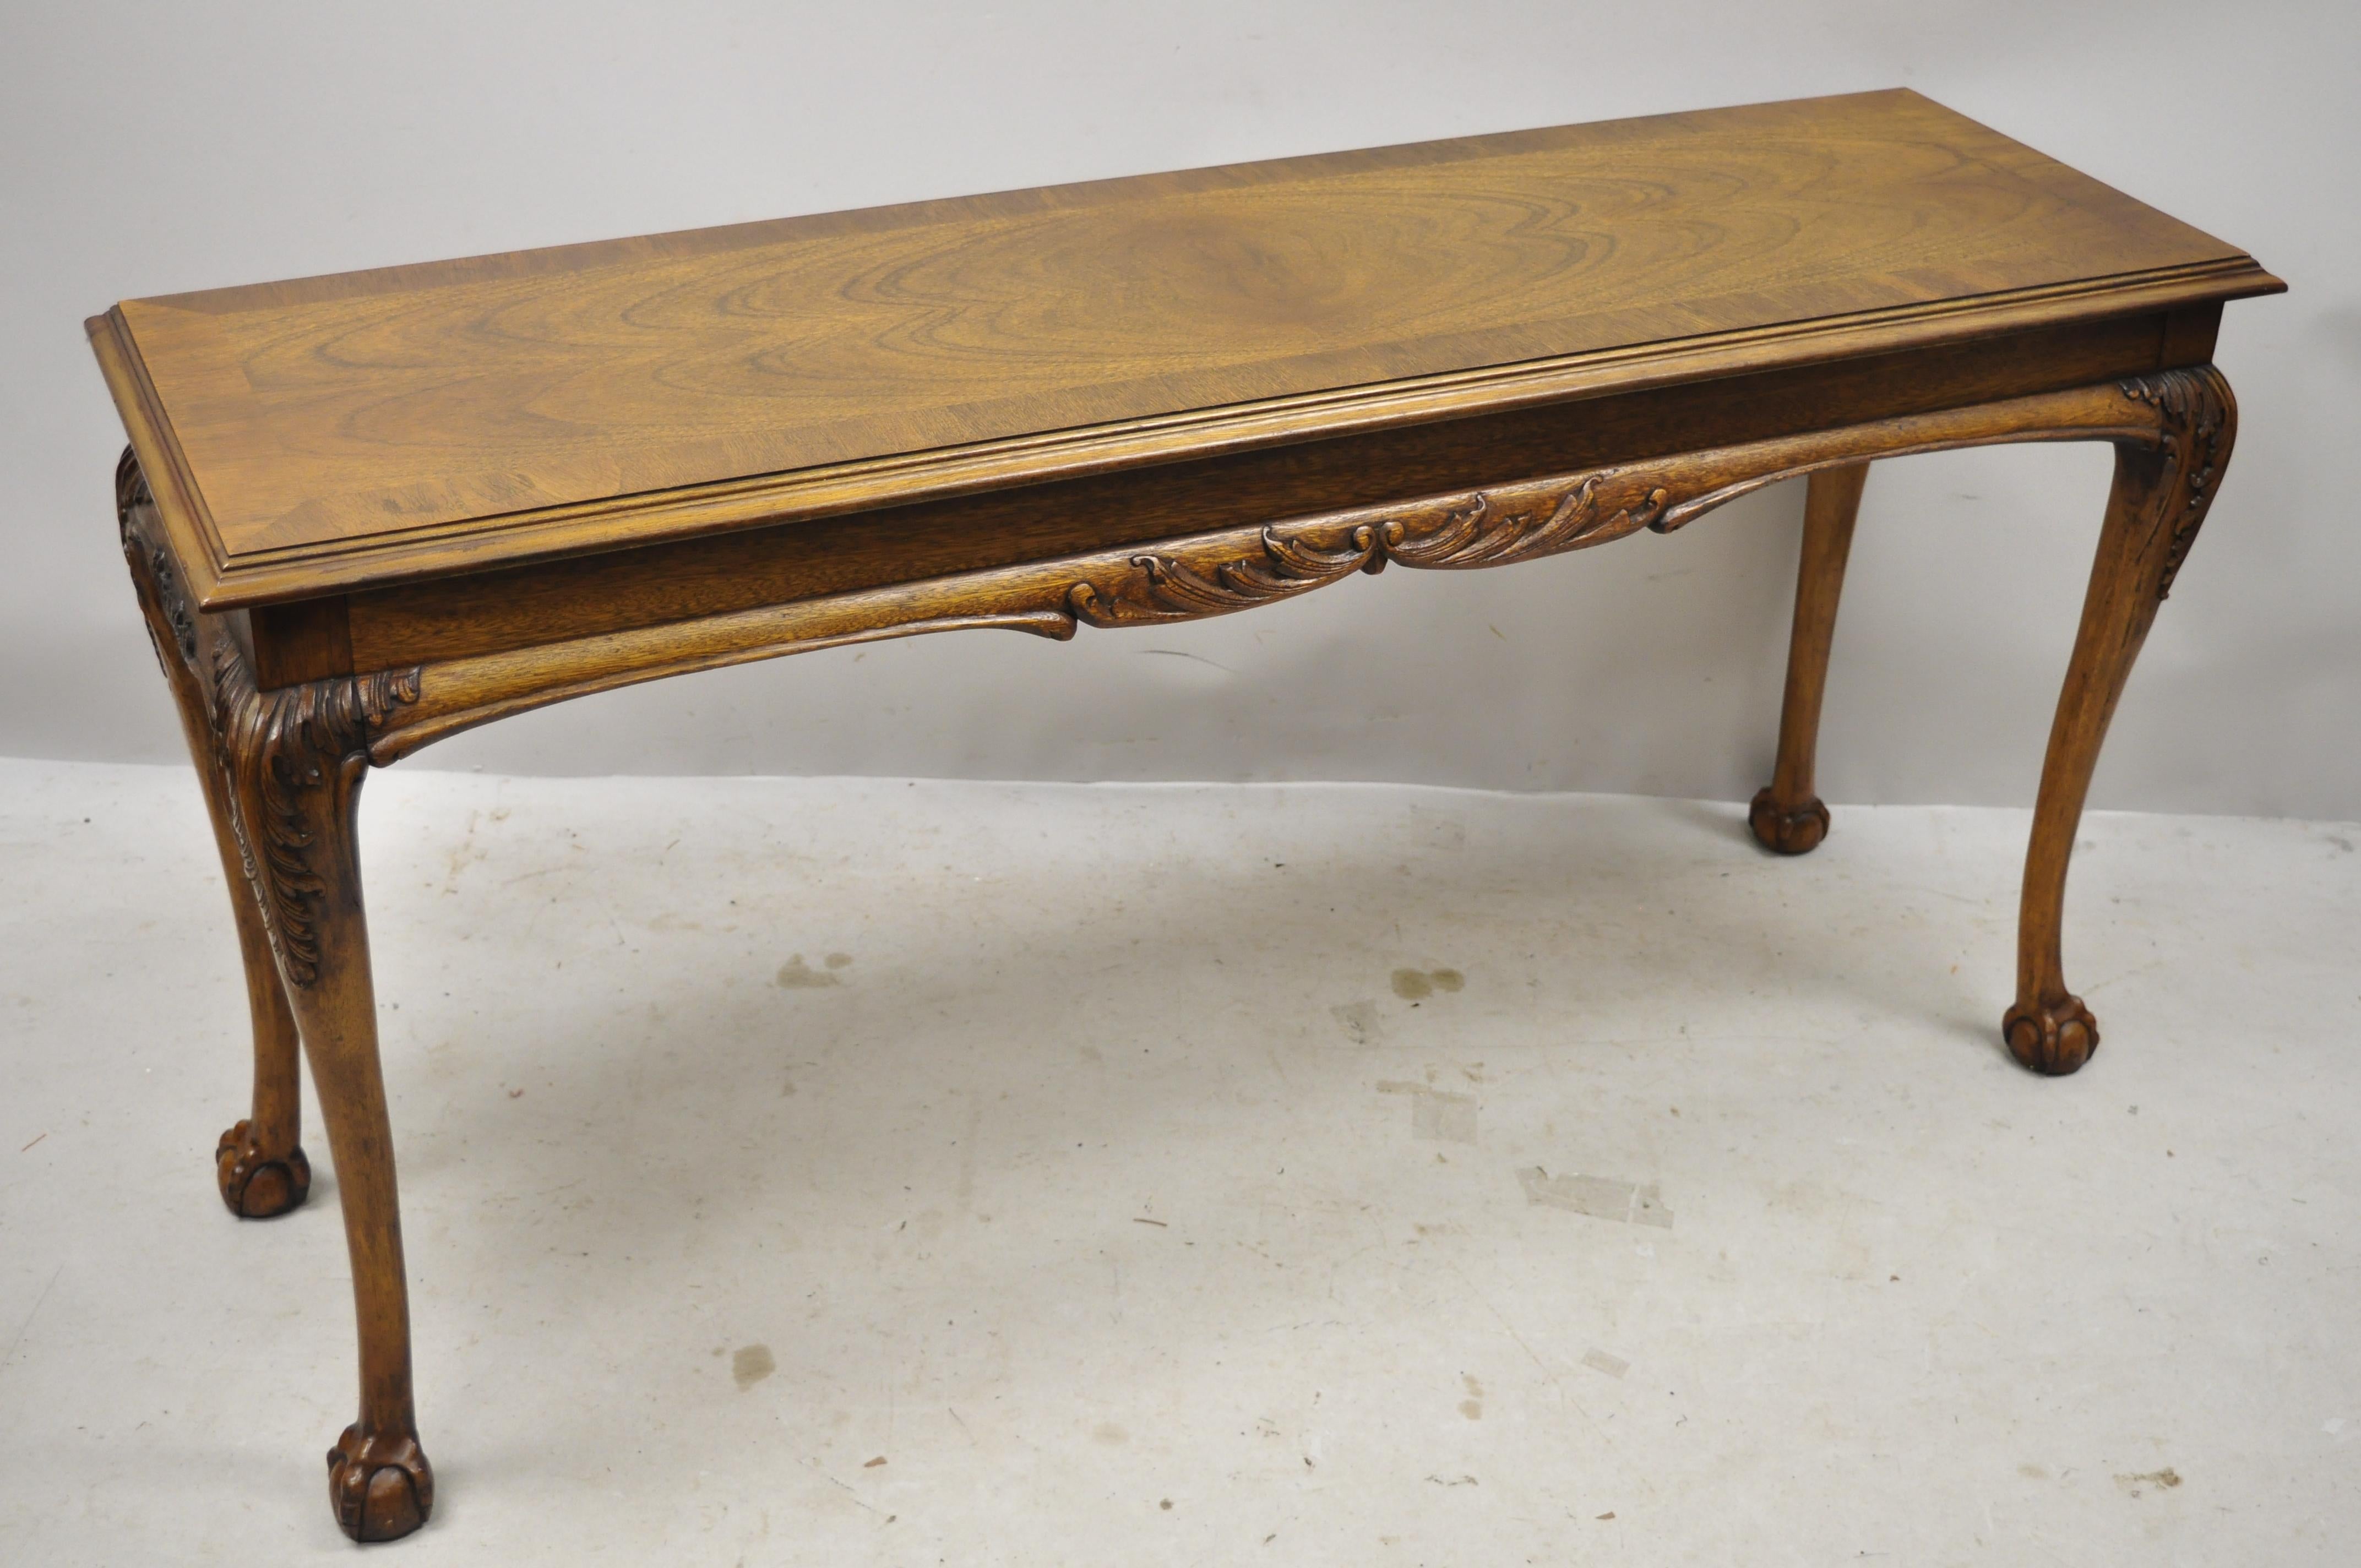 Lane Chinese Chippendale banded mahogany ball and claw console sofa hall table. Item features solid wood construction, beautiful wood grain, nicely carved details, original stamp, carved ball and claw feet, very nice vintage item, quality American